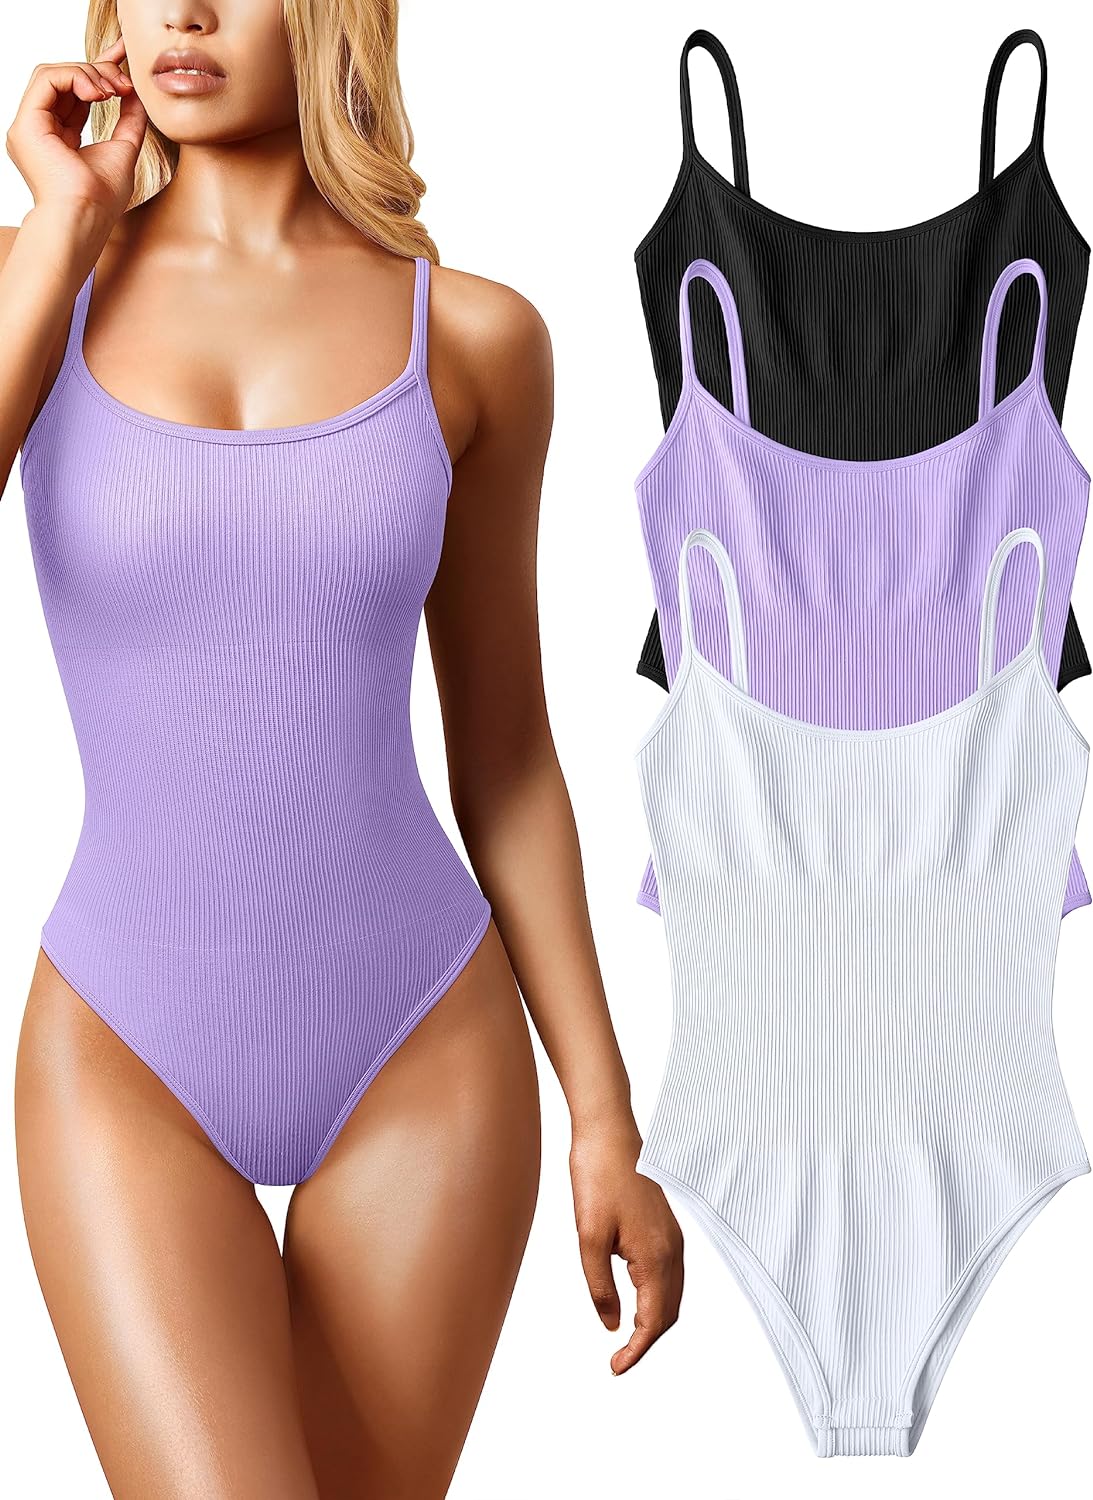 Trying on this OQQFitness Women's 3 Piece Bodysuits Sexy Ribbed